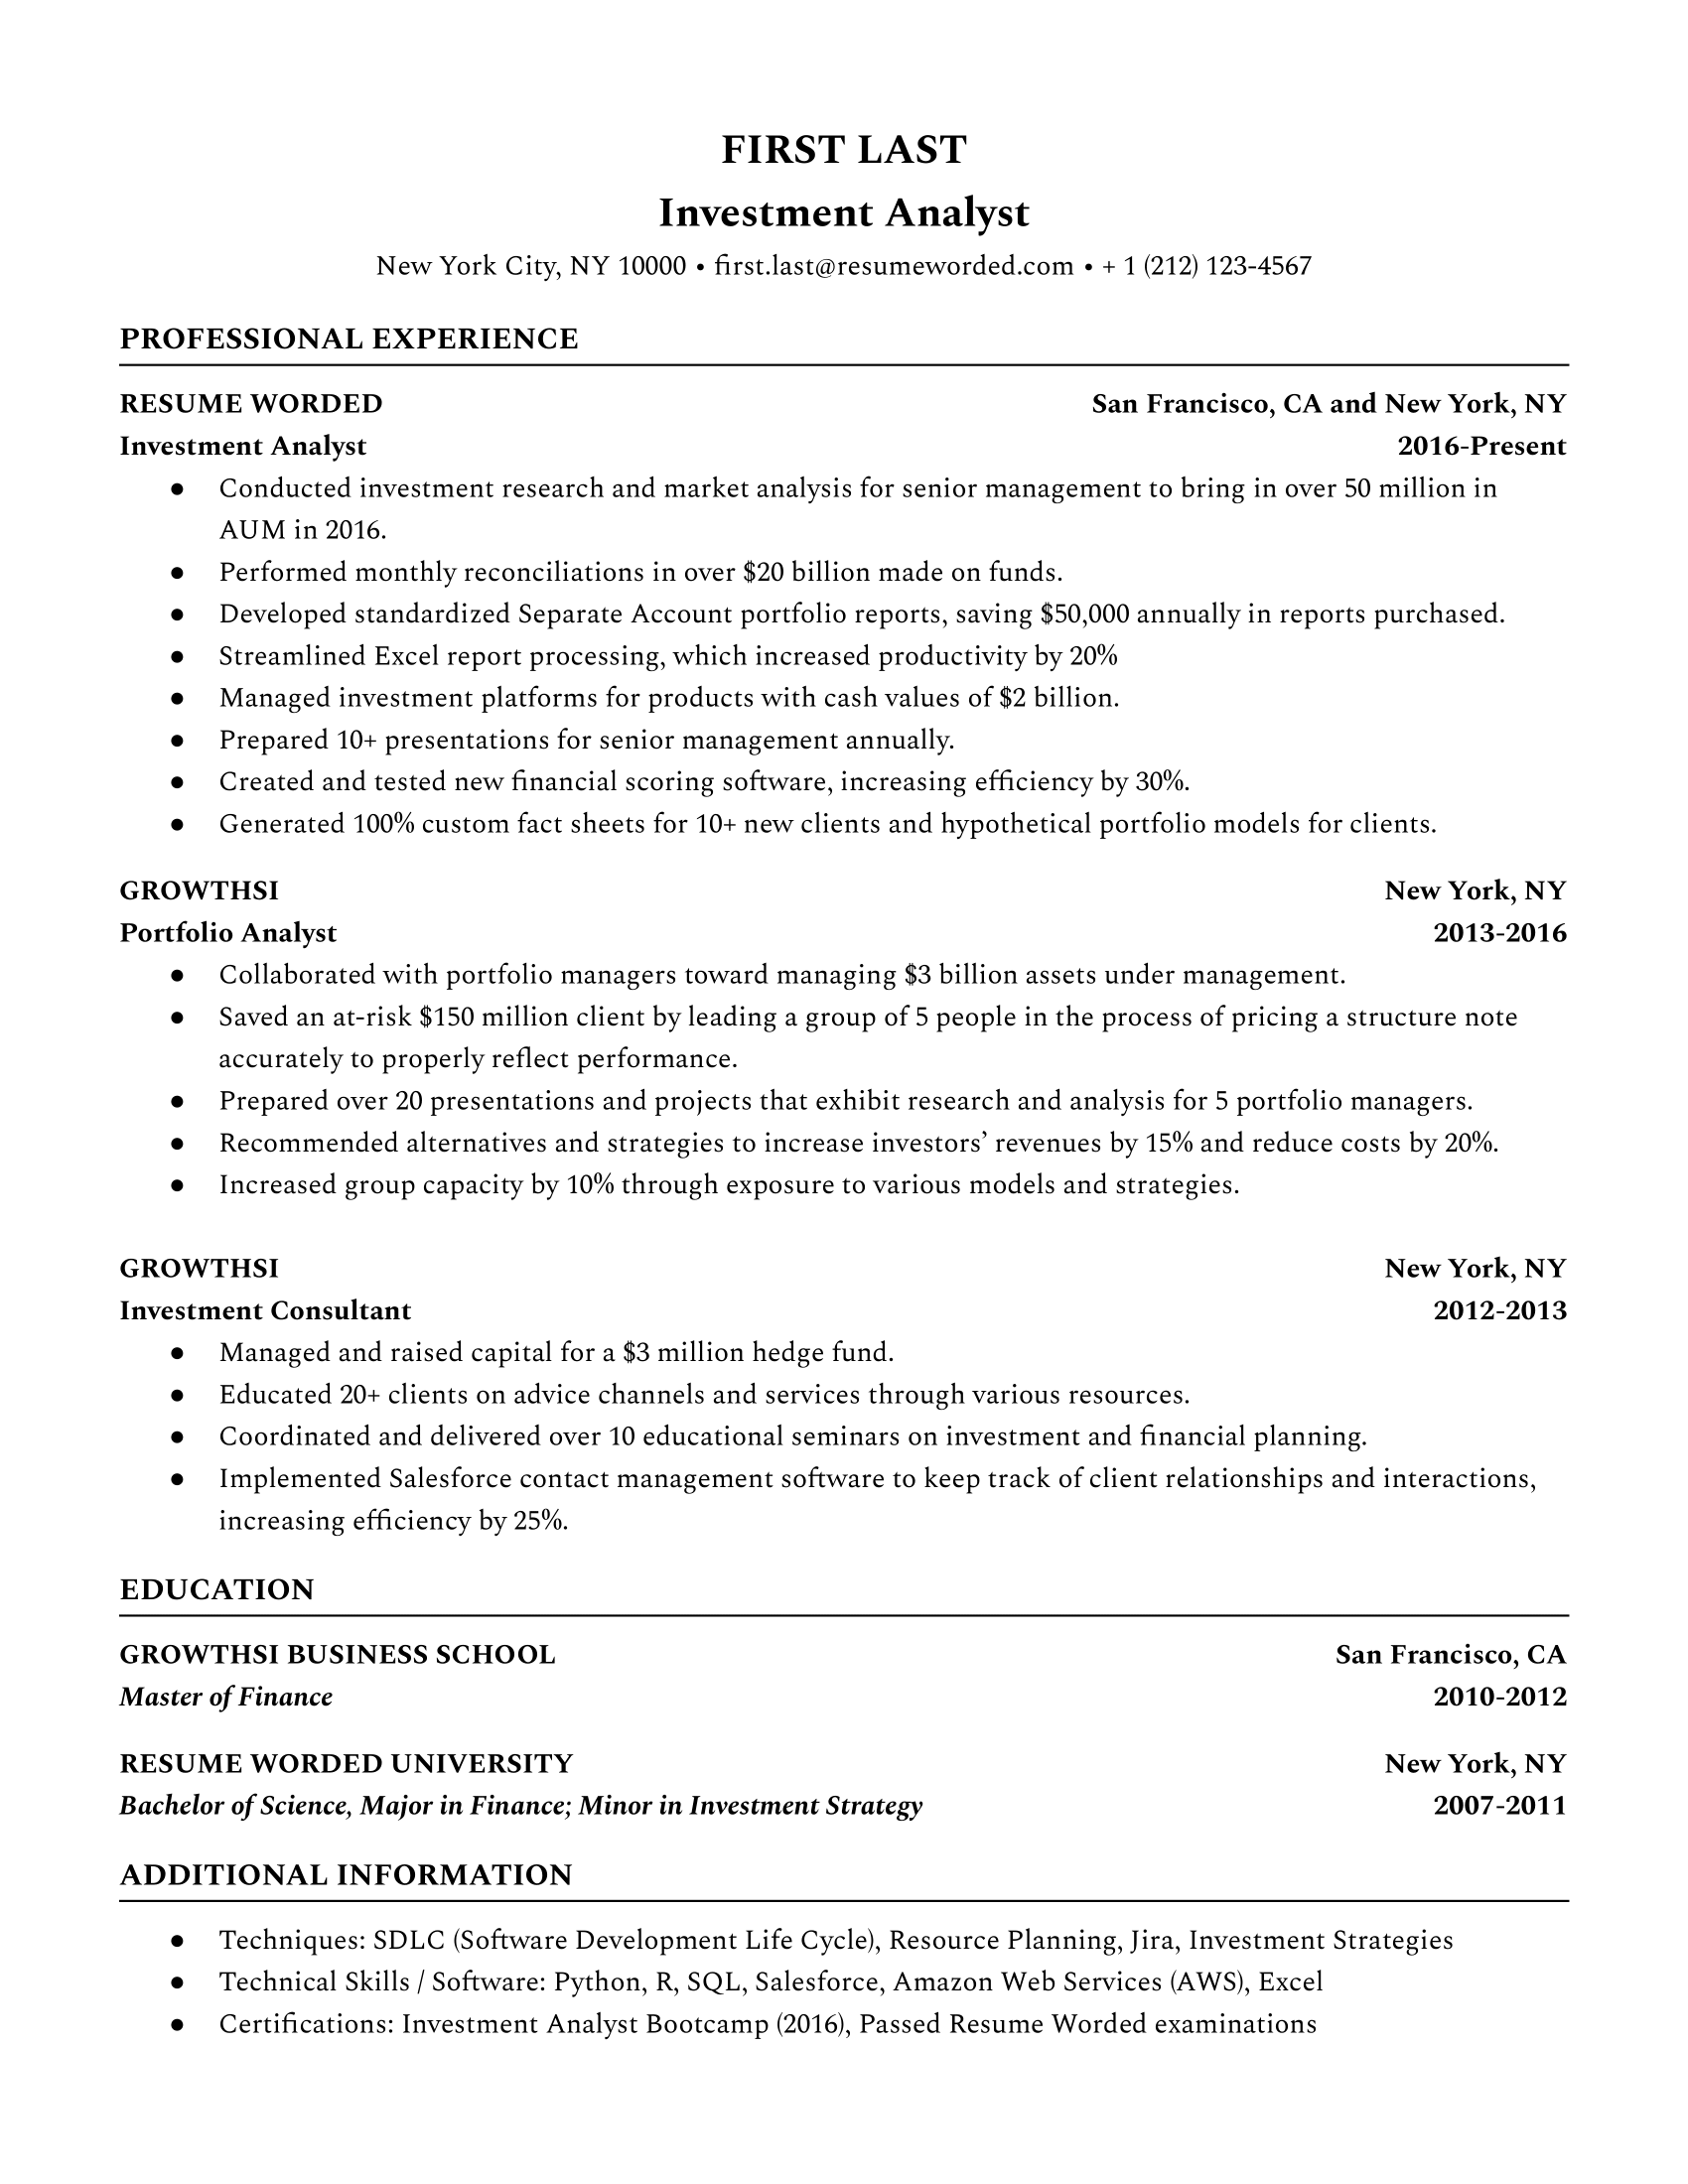 Investment analyst resume with quantifiable achievements and strong action verbs